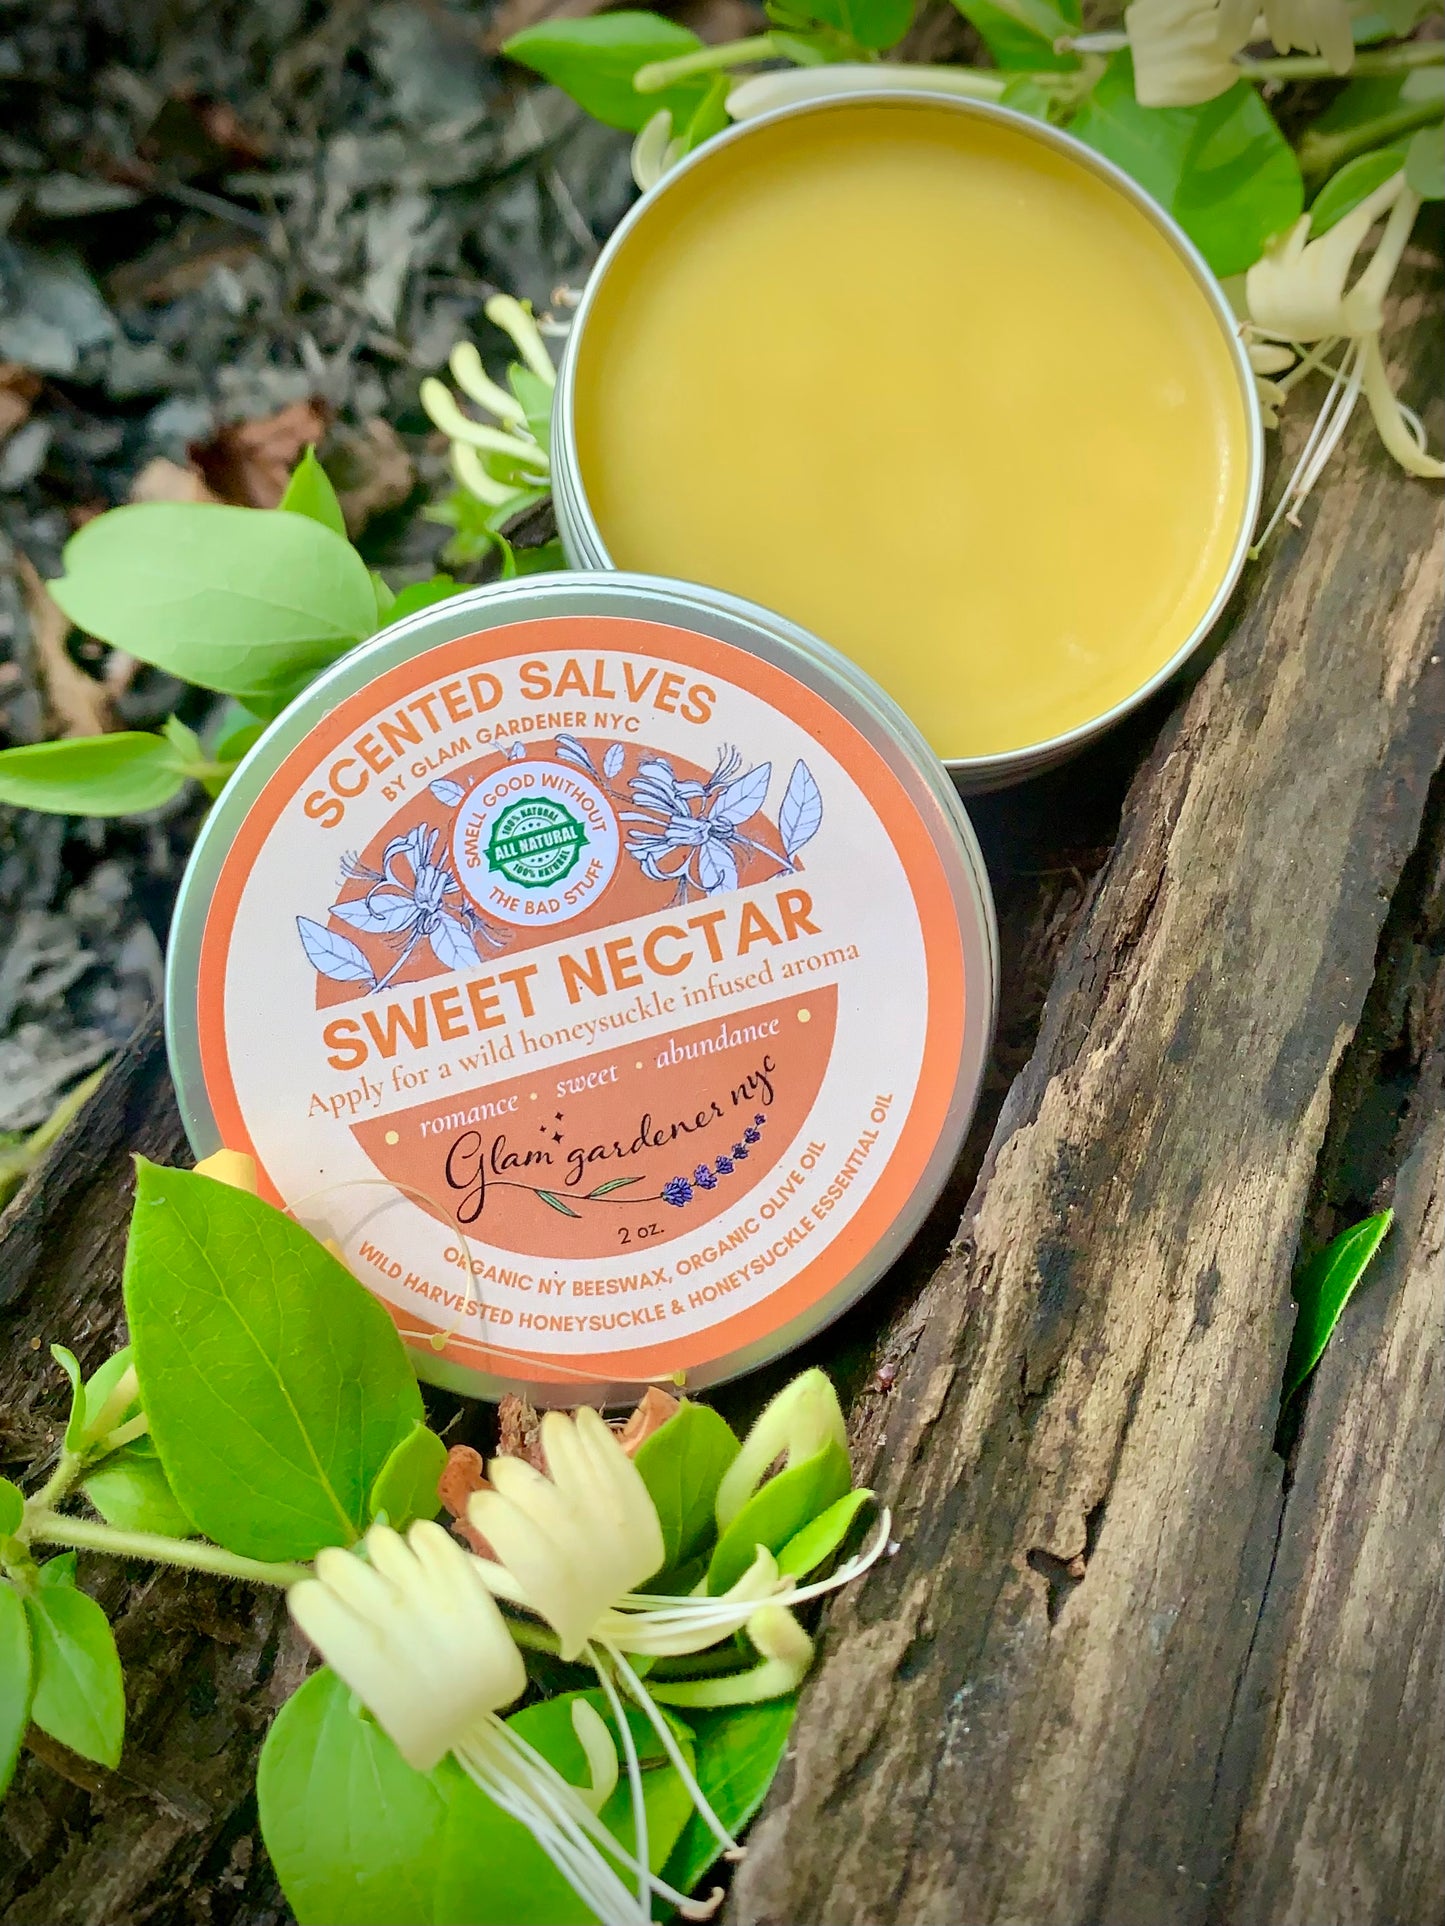 Sweet Nectar scented salve | natural solid perfume and healing lotion with wild-harvested honeysuckle flowers